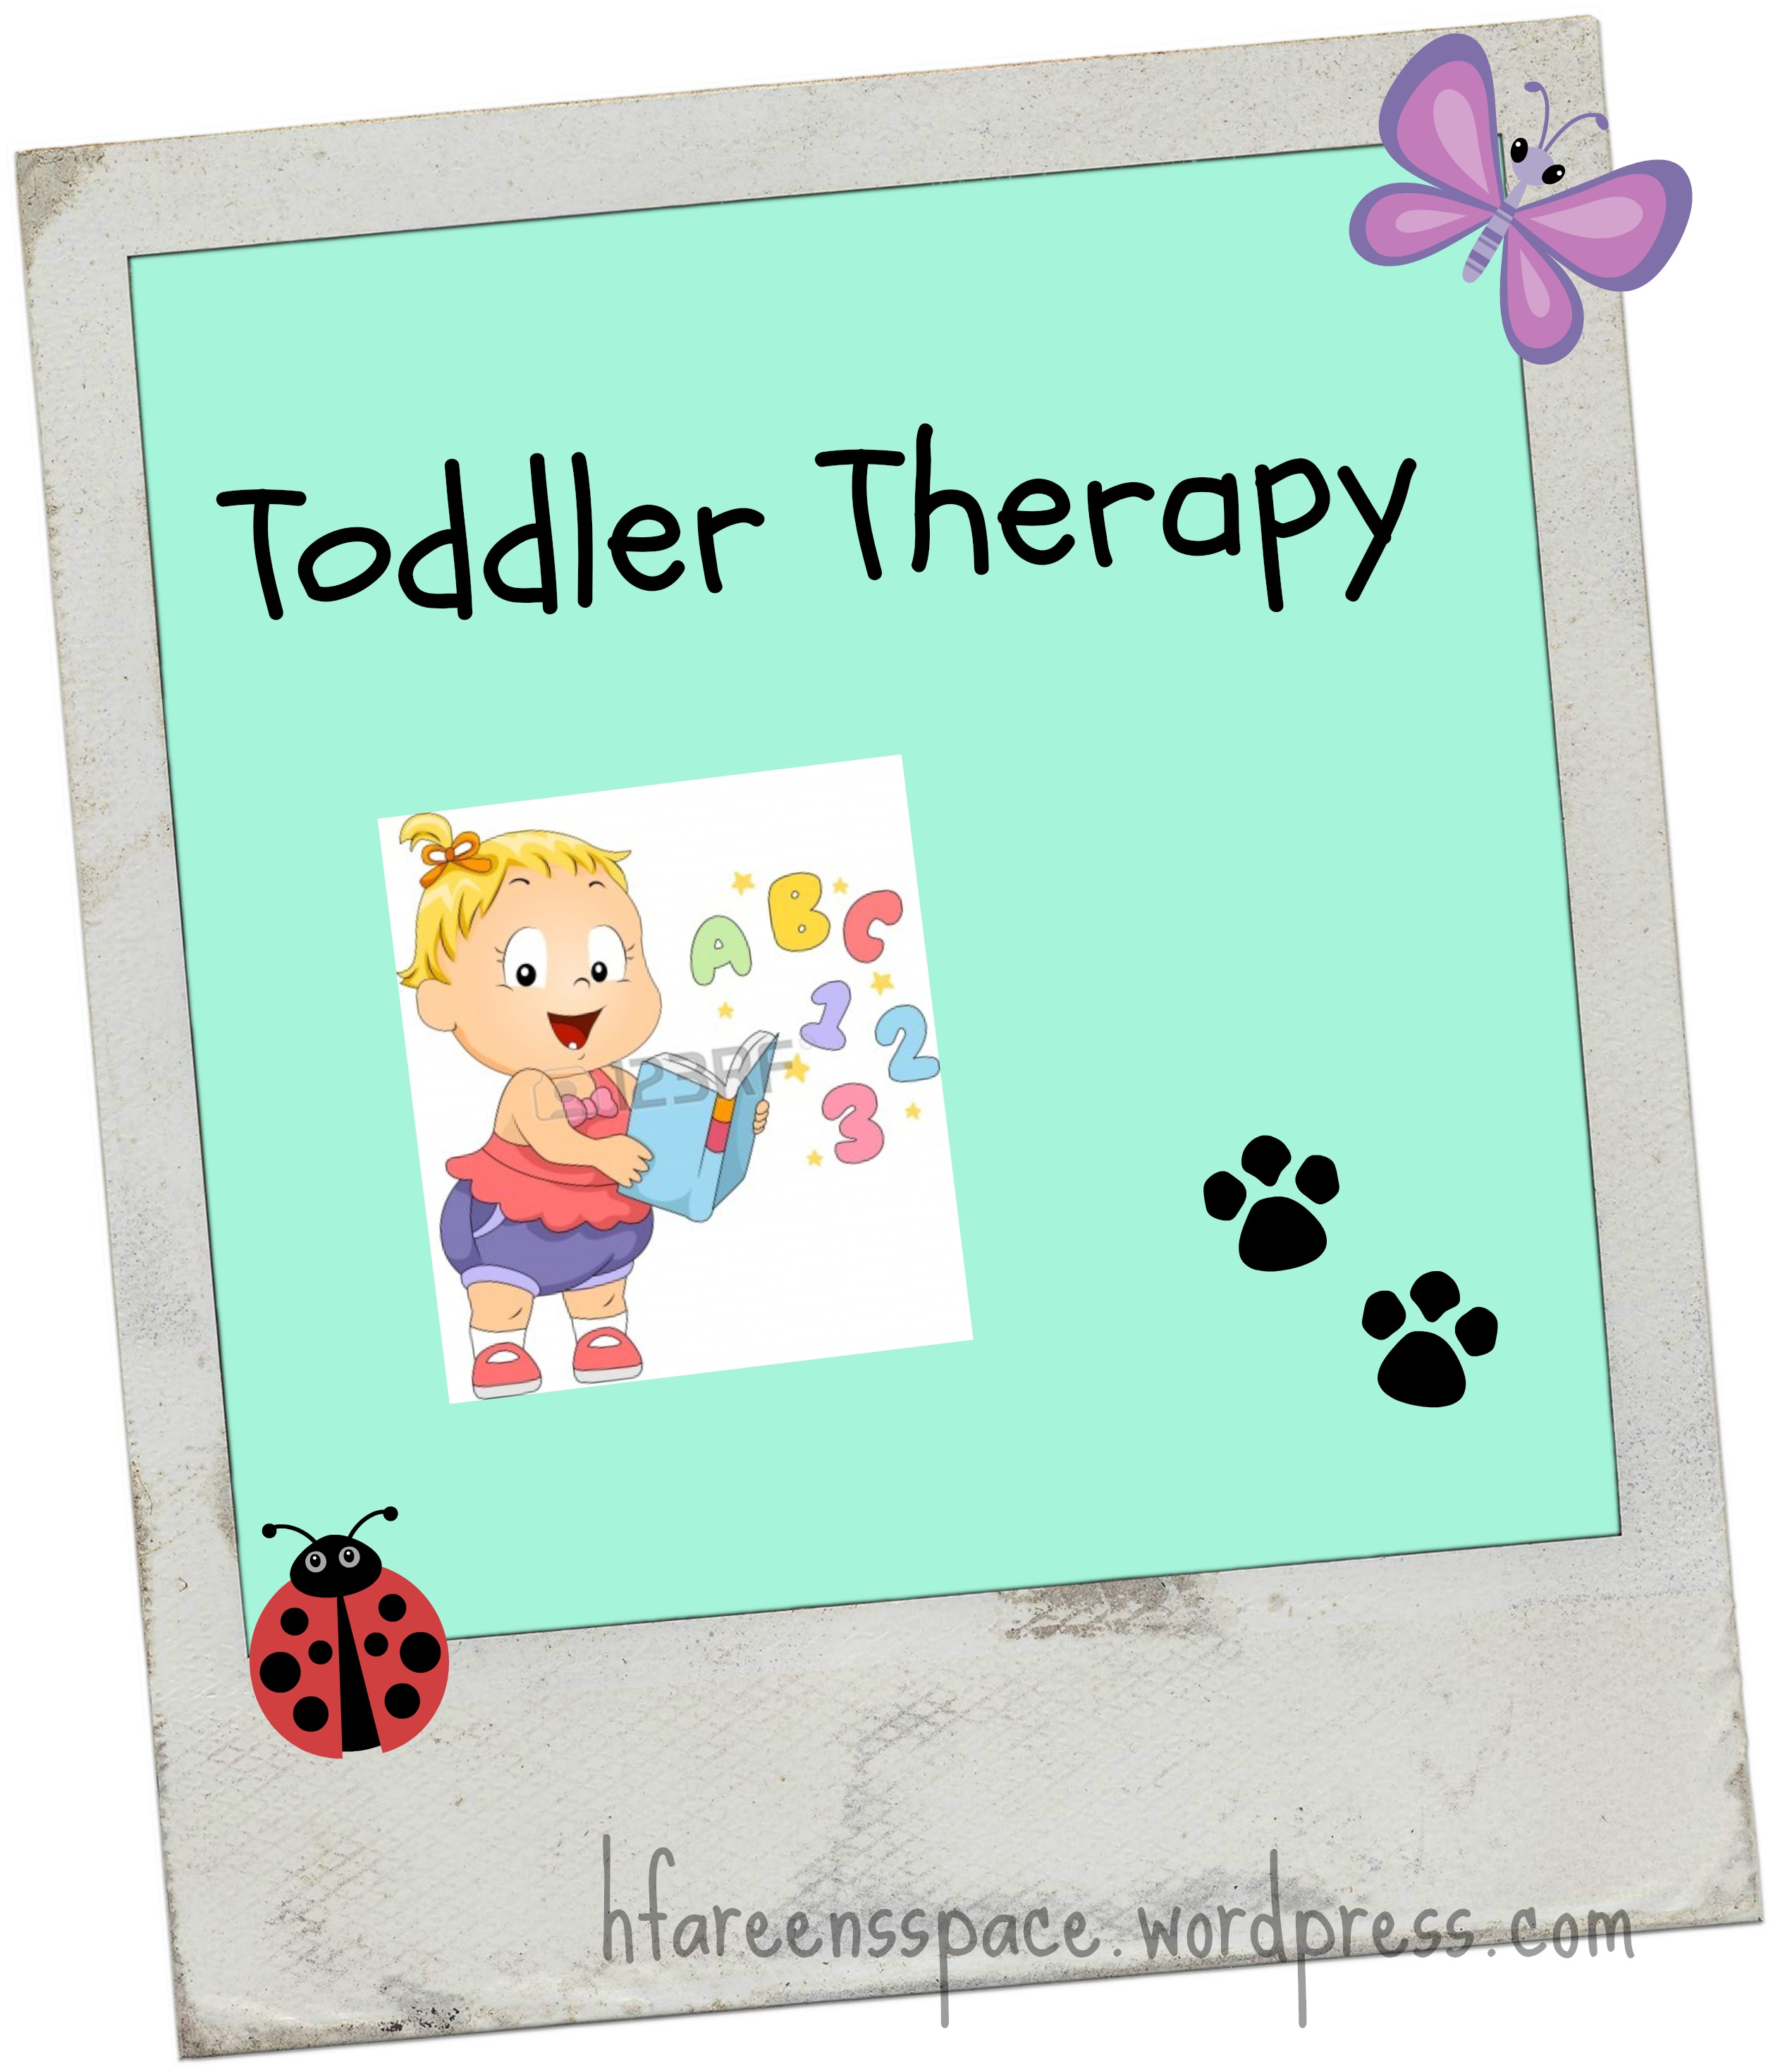 Toddler Therapy